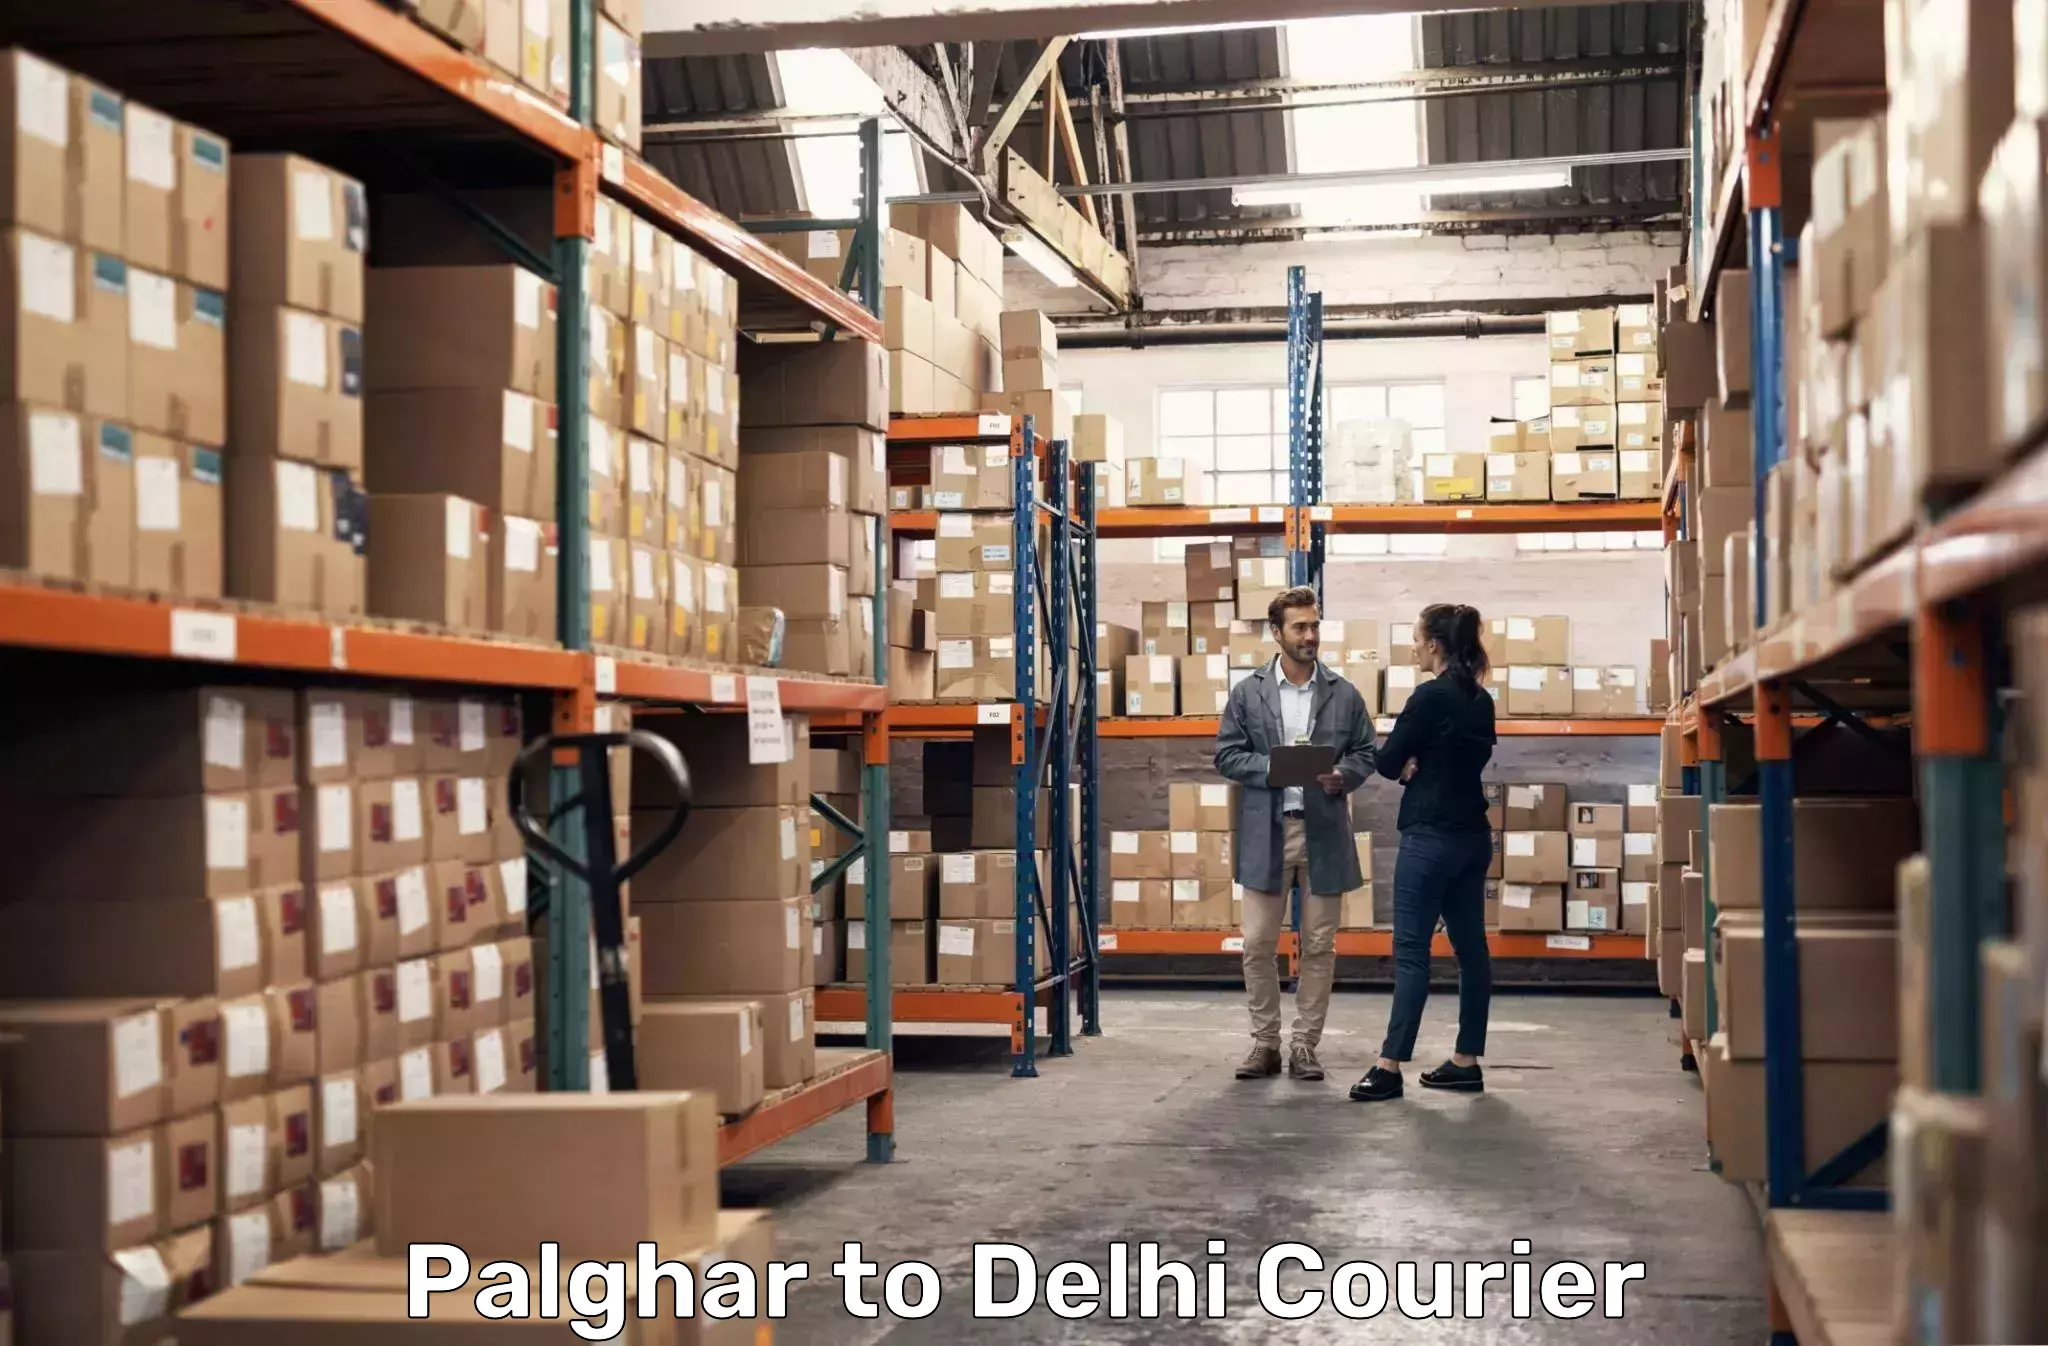 Express delivery network Palghar to IIT Delhi